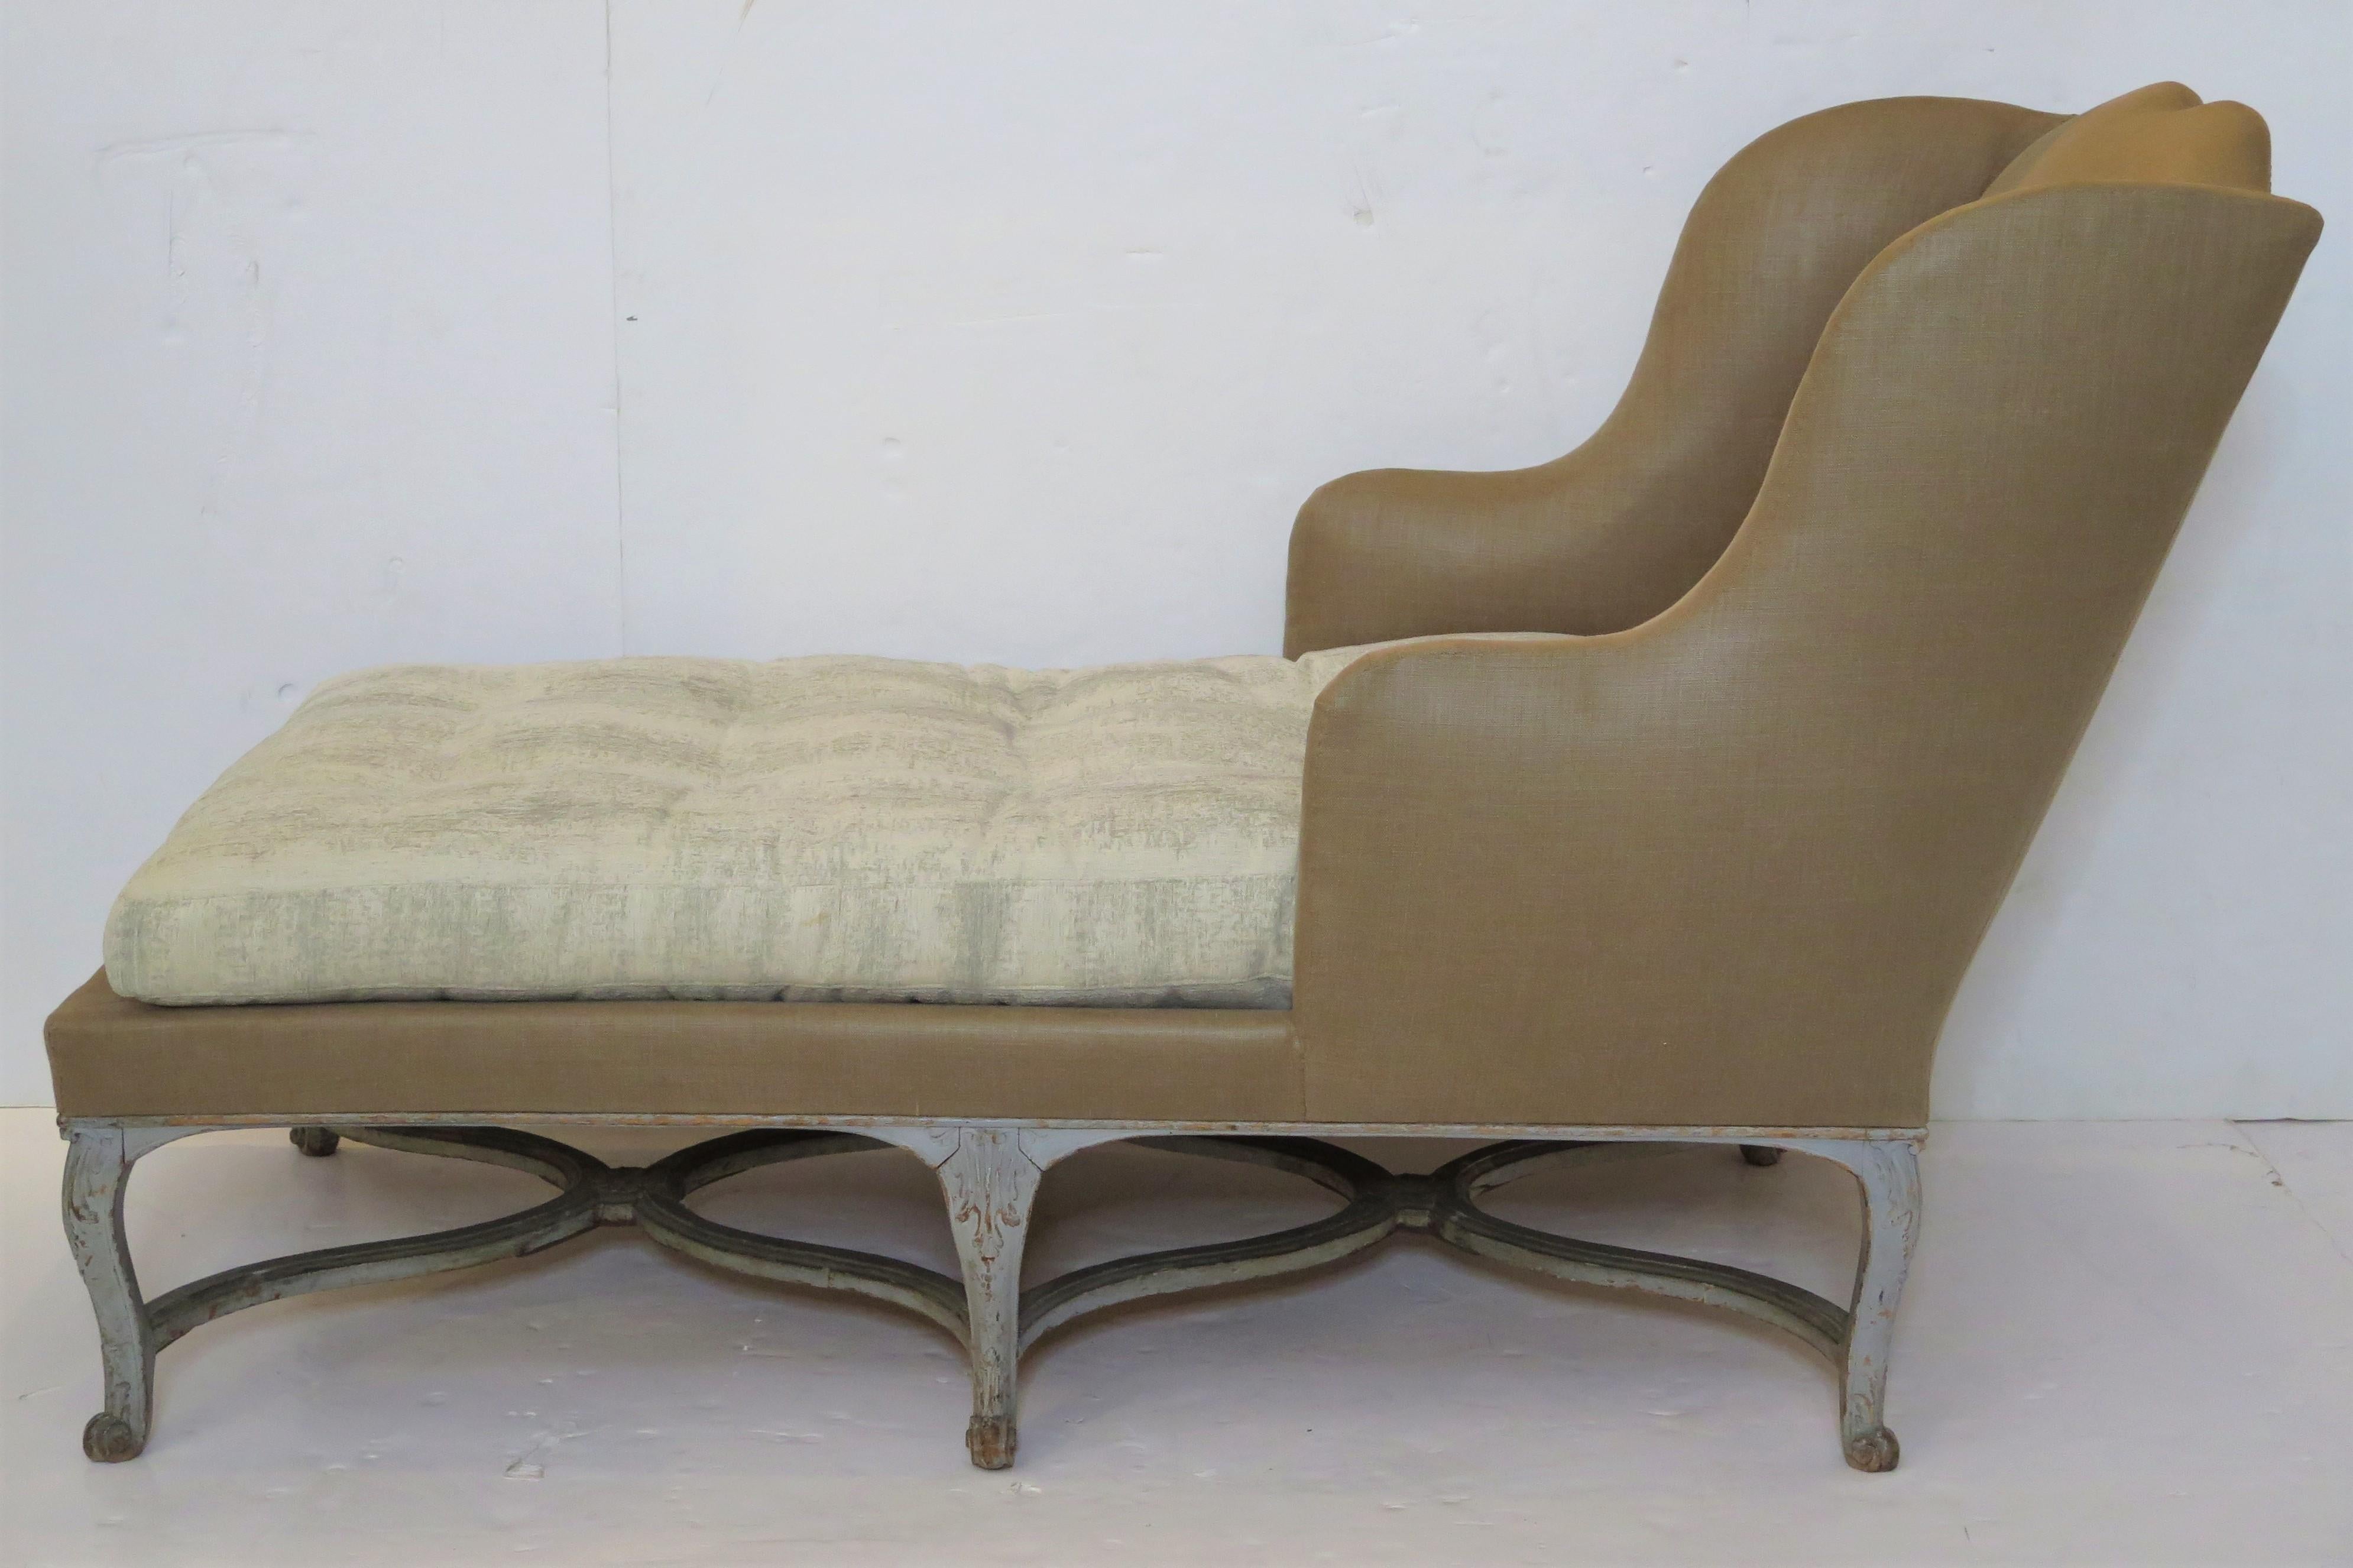 Hand-Painted French Régence Period Chaise Lounge For Sale